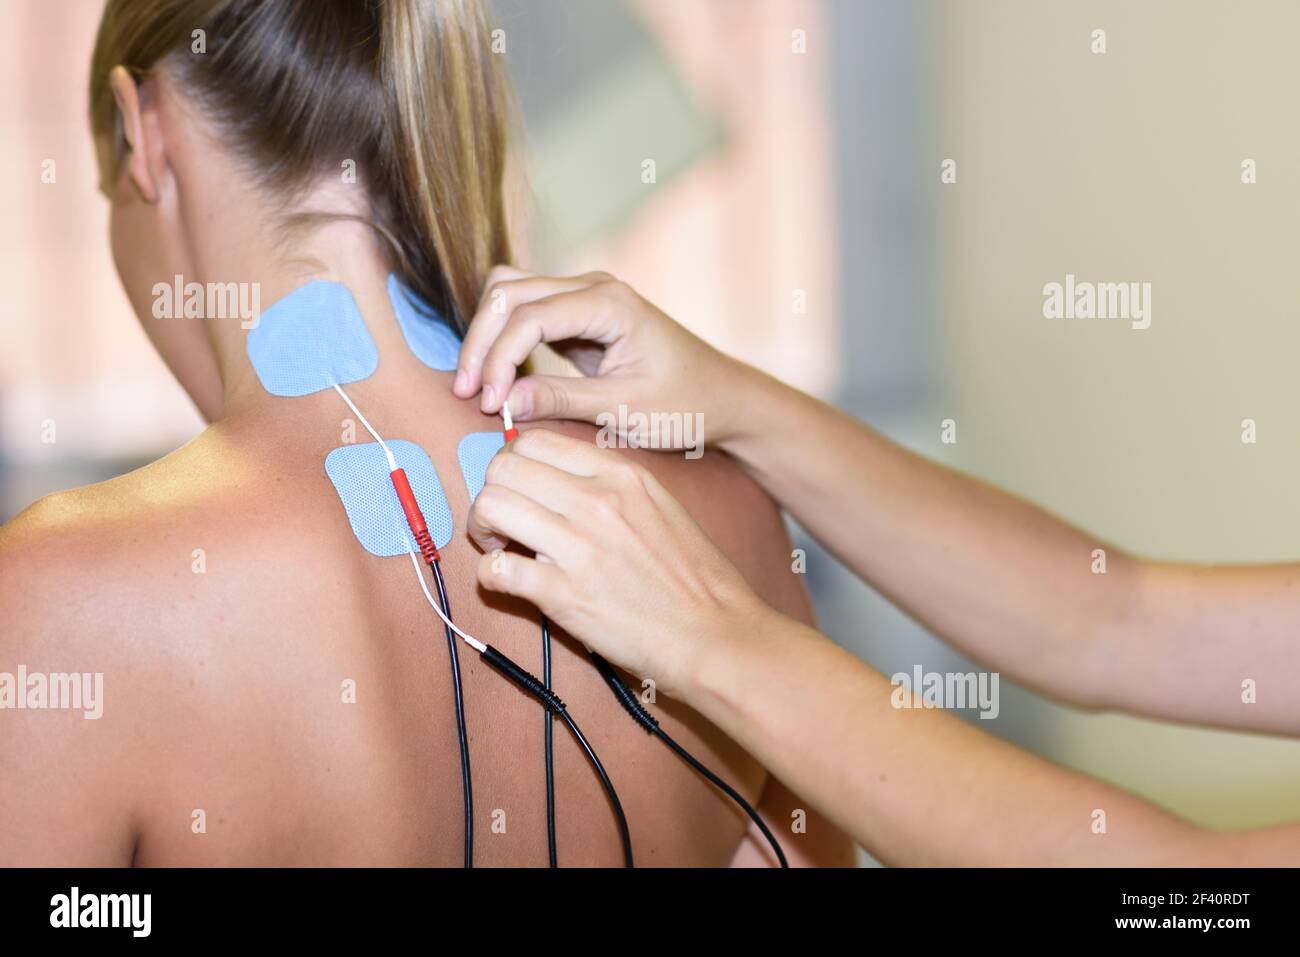 Electro Stimulation in Physical Therapy To a Young Woman. Medical Check at  the Shoulder in a Physiotherapy Center. Tens Therapy Stock Image - Image of  nerve, person: 175162575